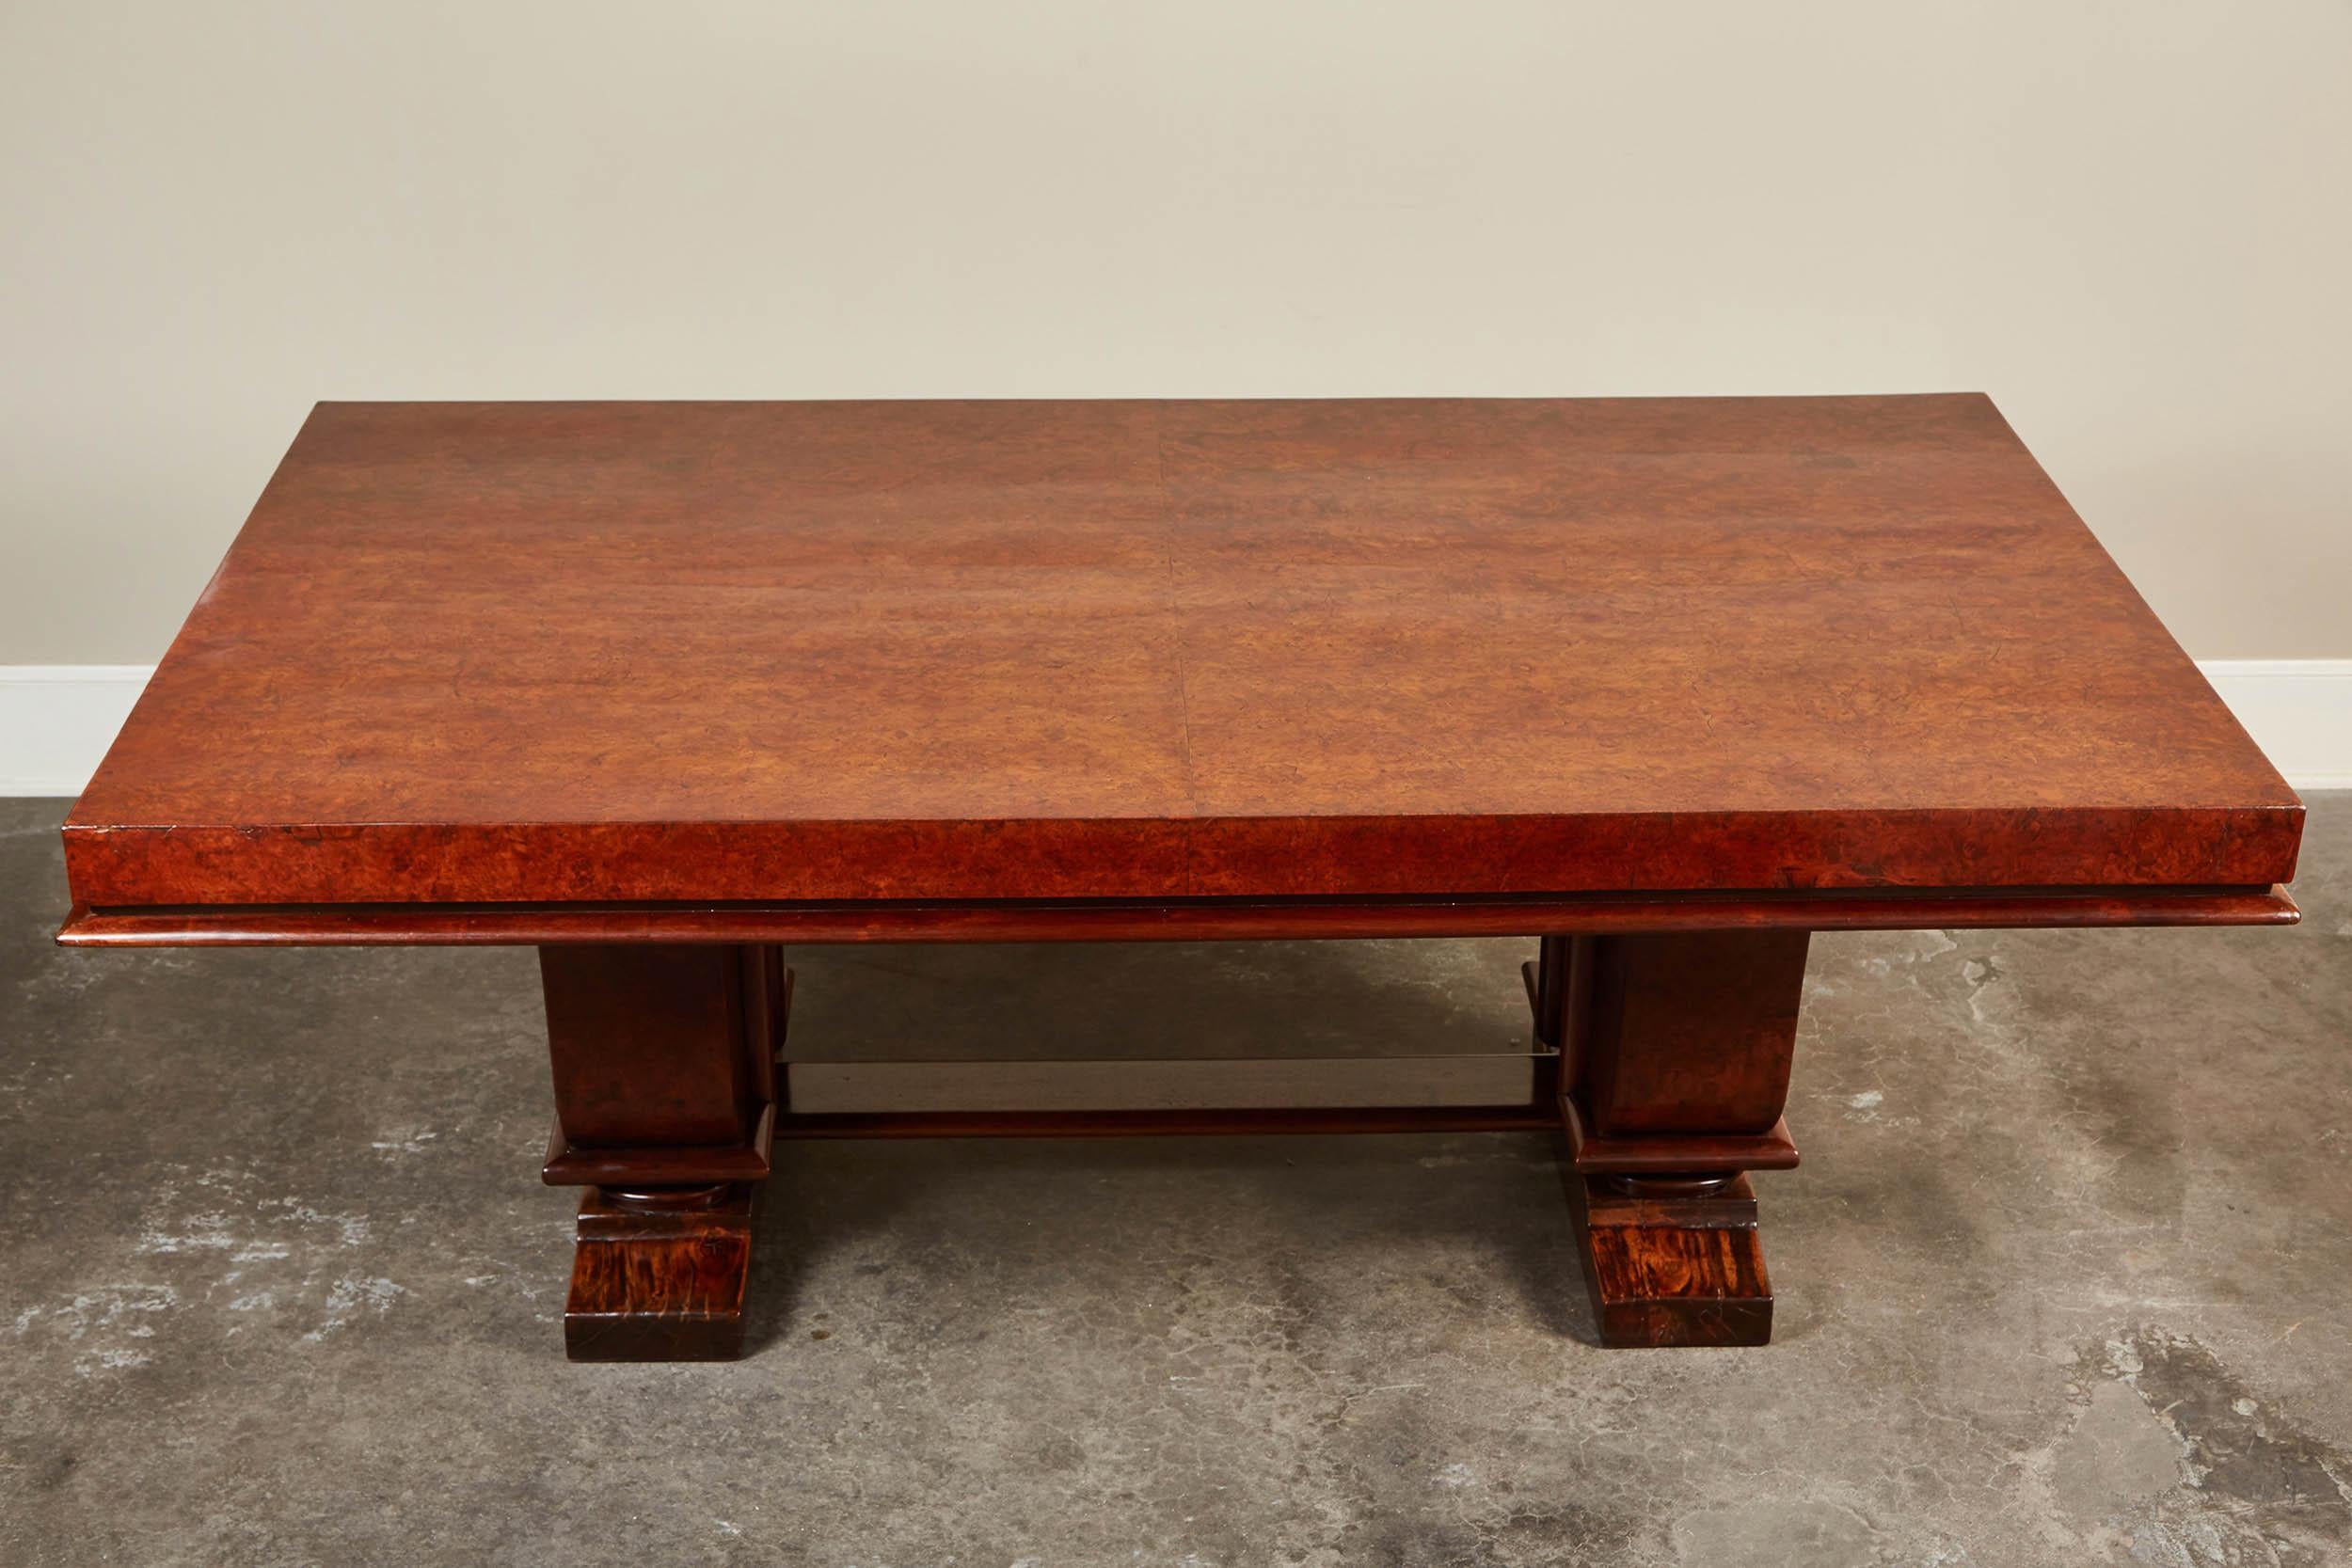 Vietnamese 1930s Indo-Chinese Art Deco Dining Table For Sale